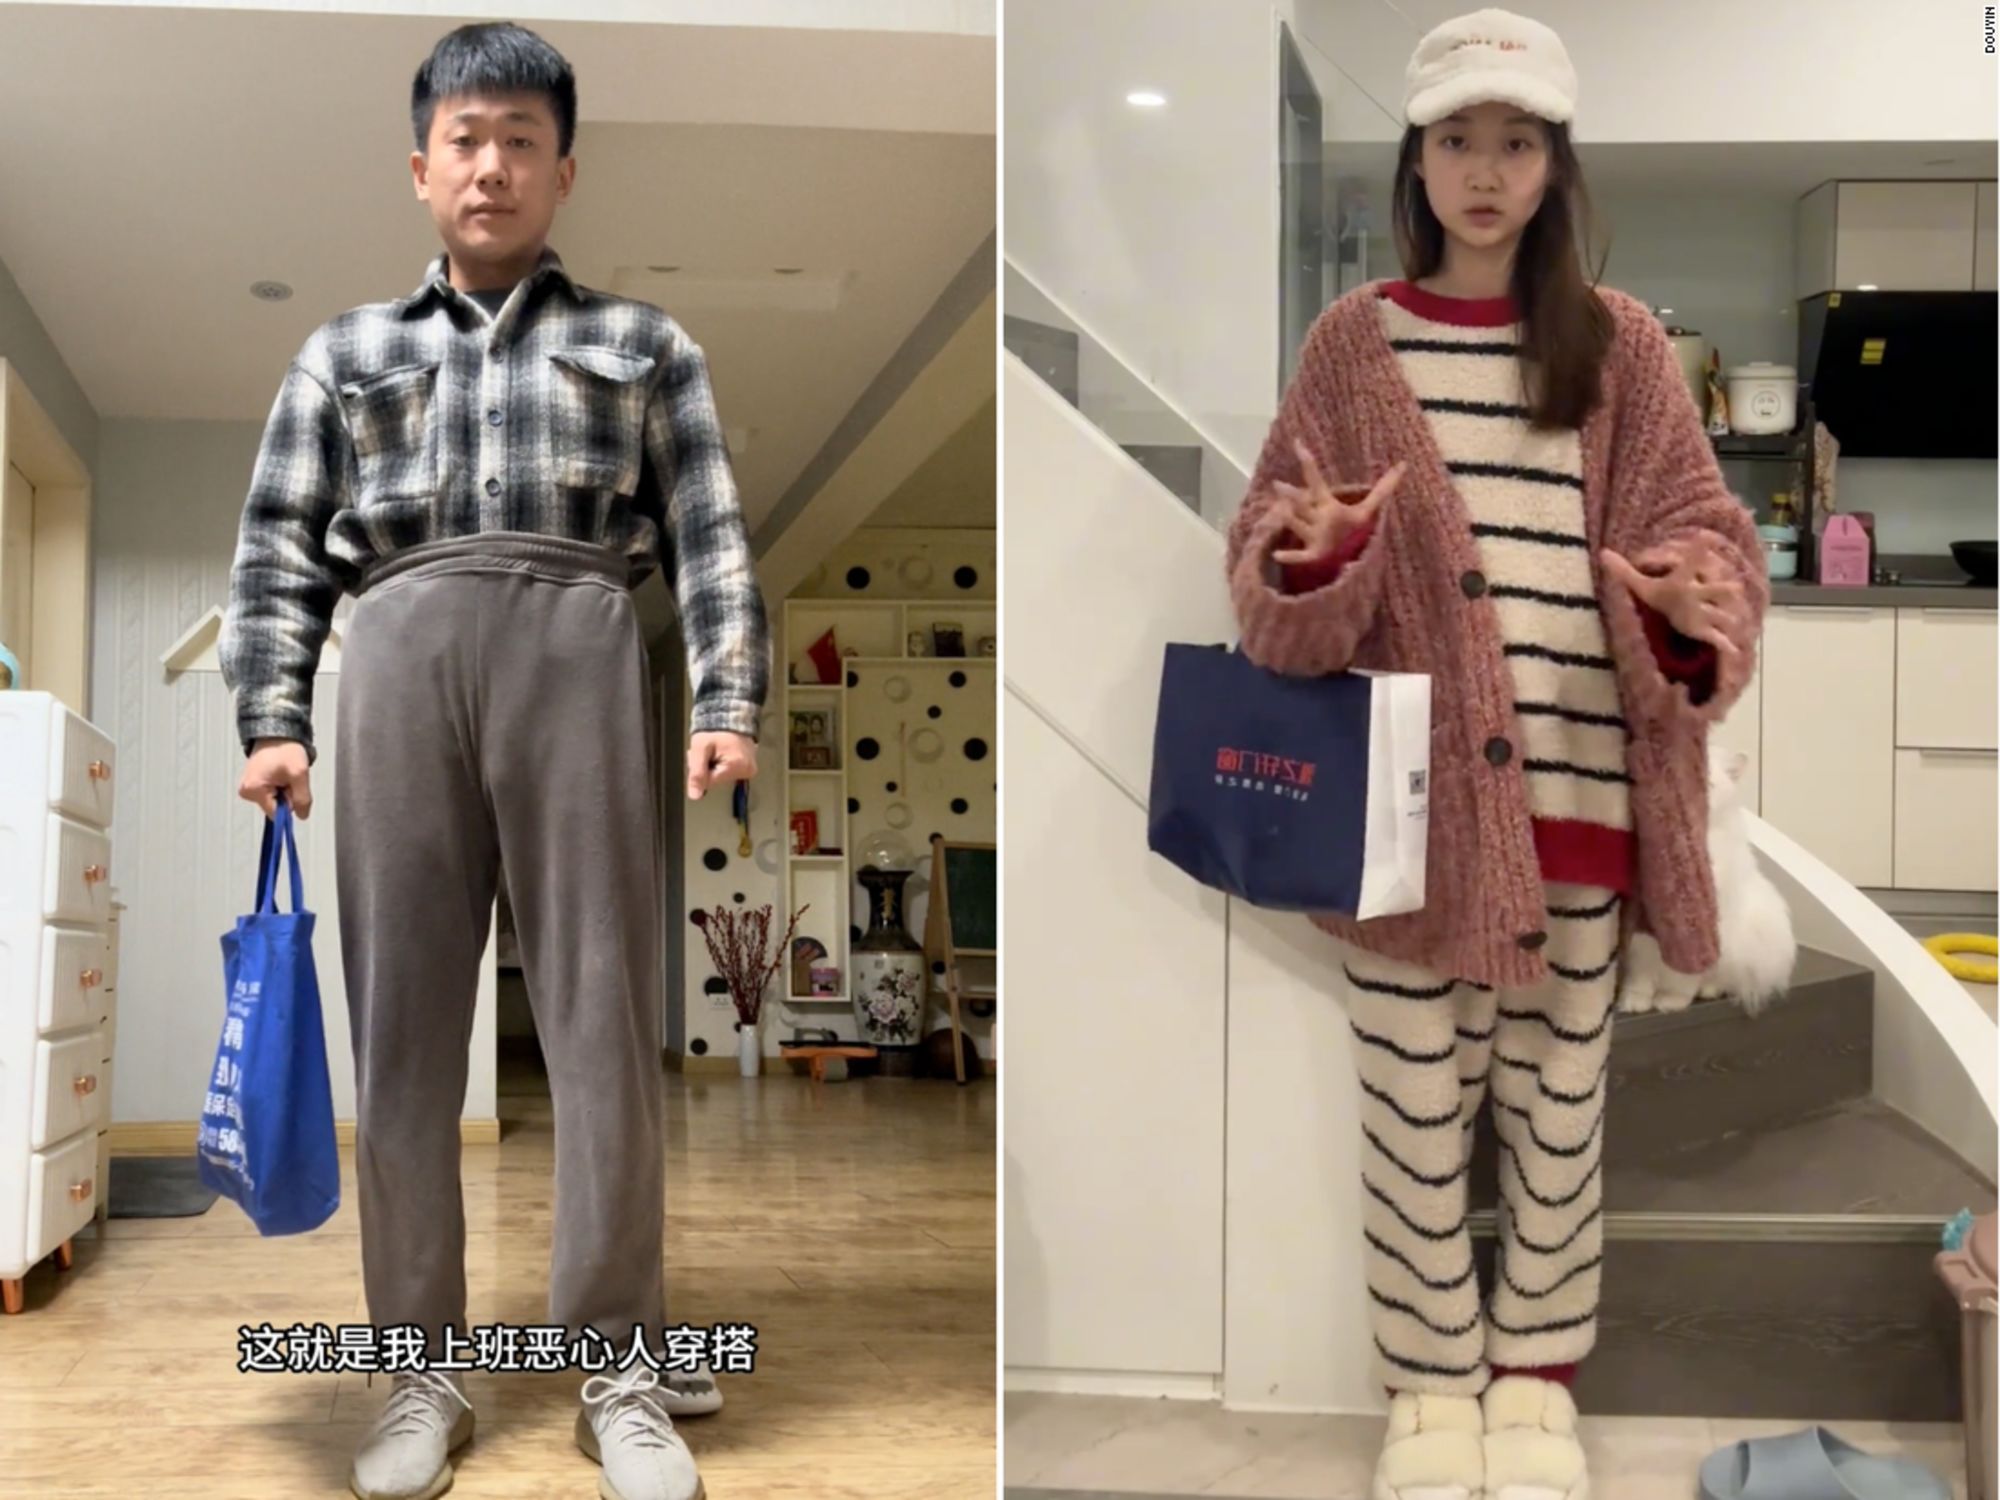 Social media users post their 'gross outfits' on platforms like Douyin, China's TikTok.